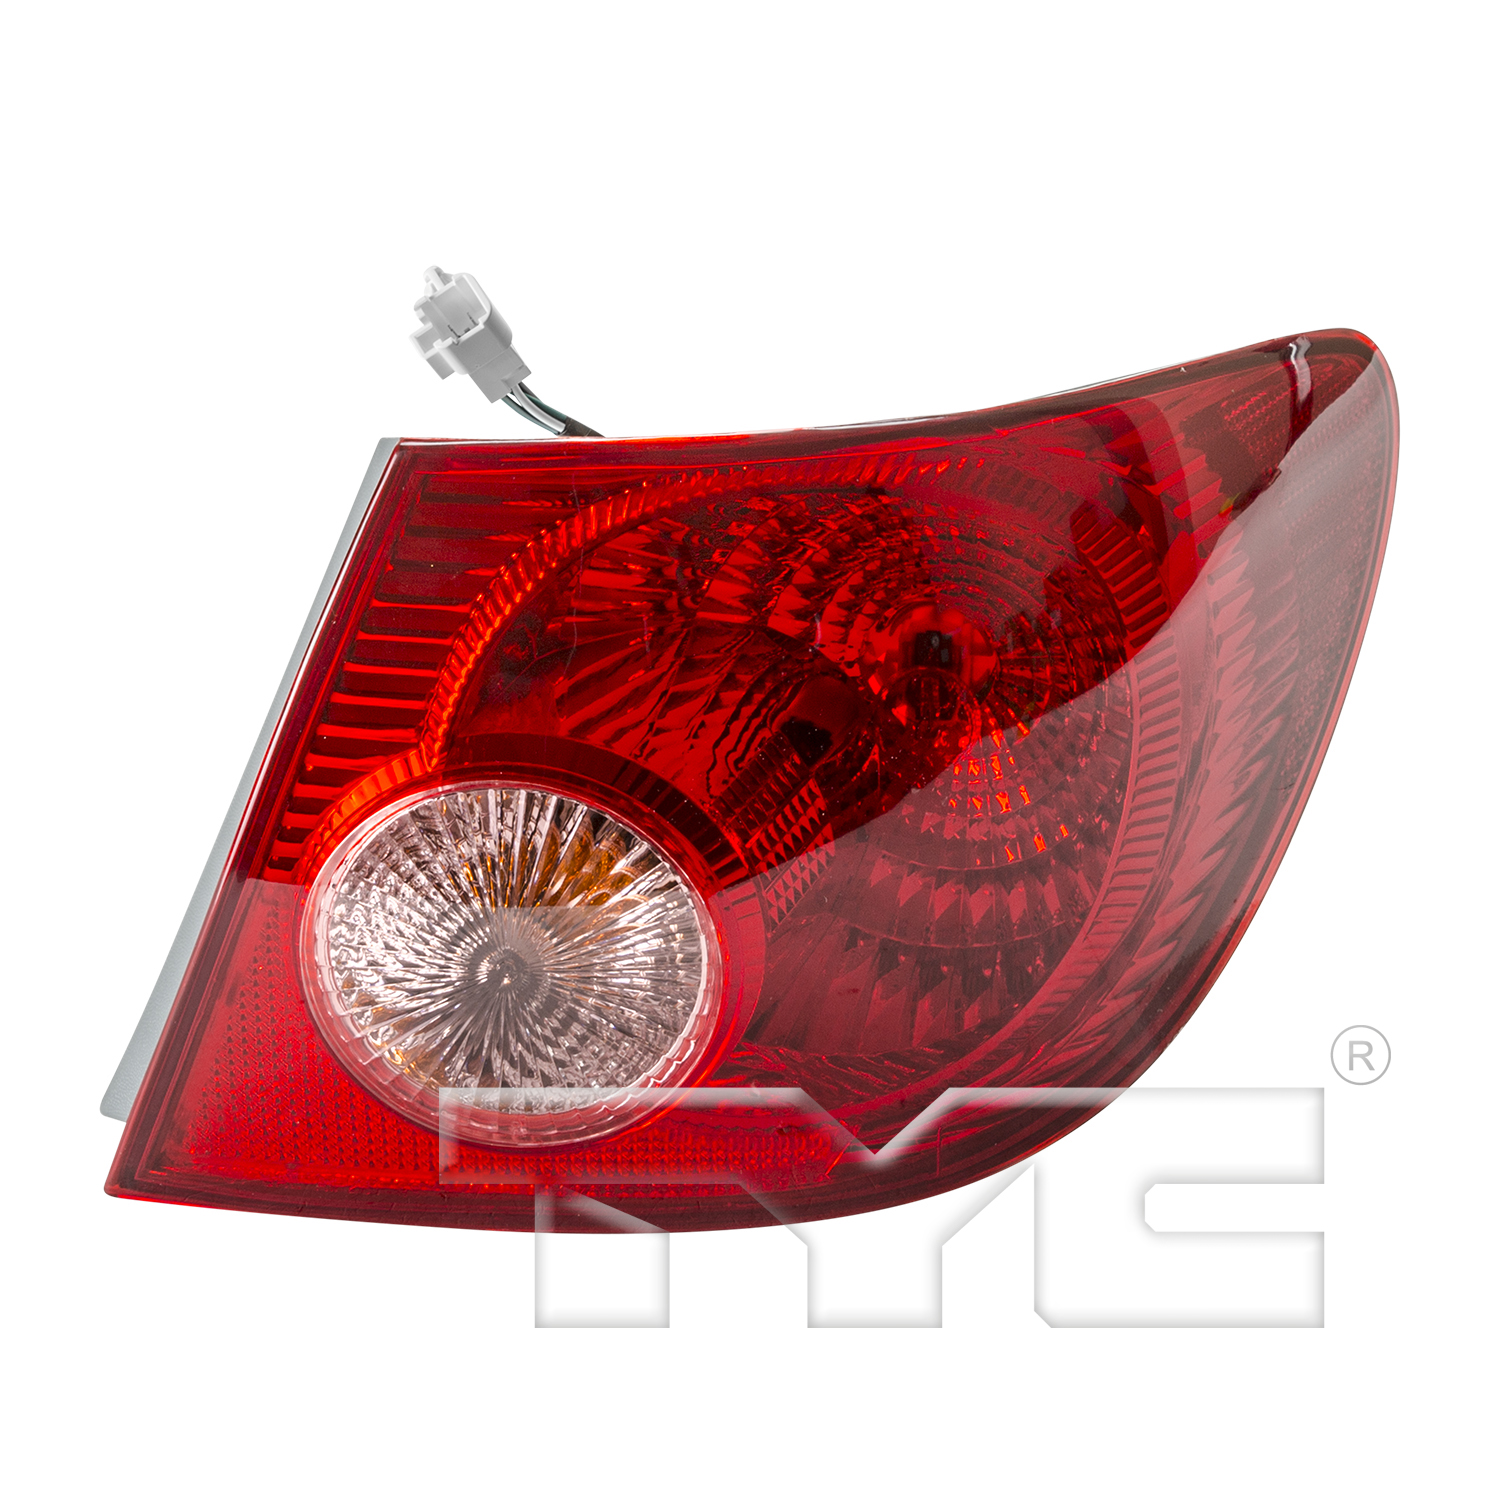 Aftermarket TAILLIGHTS for TOYOTA - COROLLA, COROLLA,05-08,RT Taillamp assy